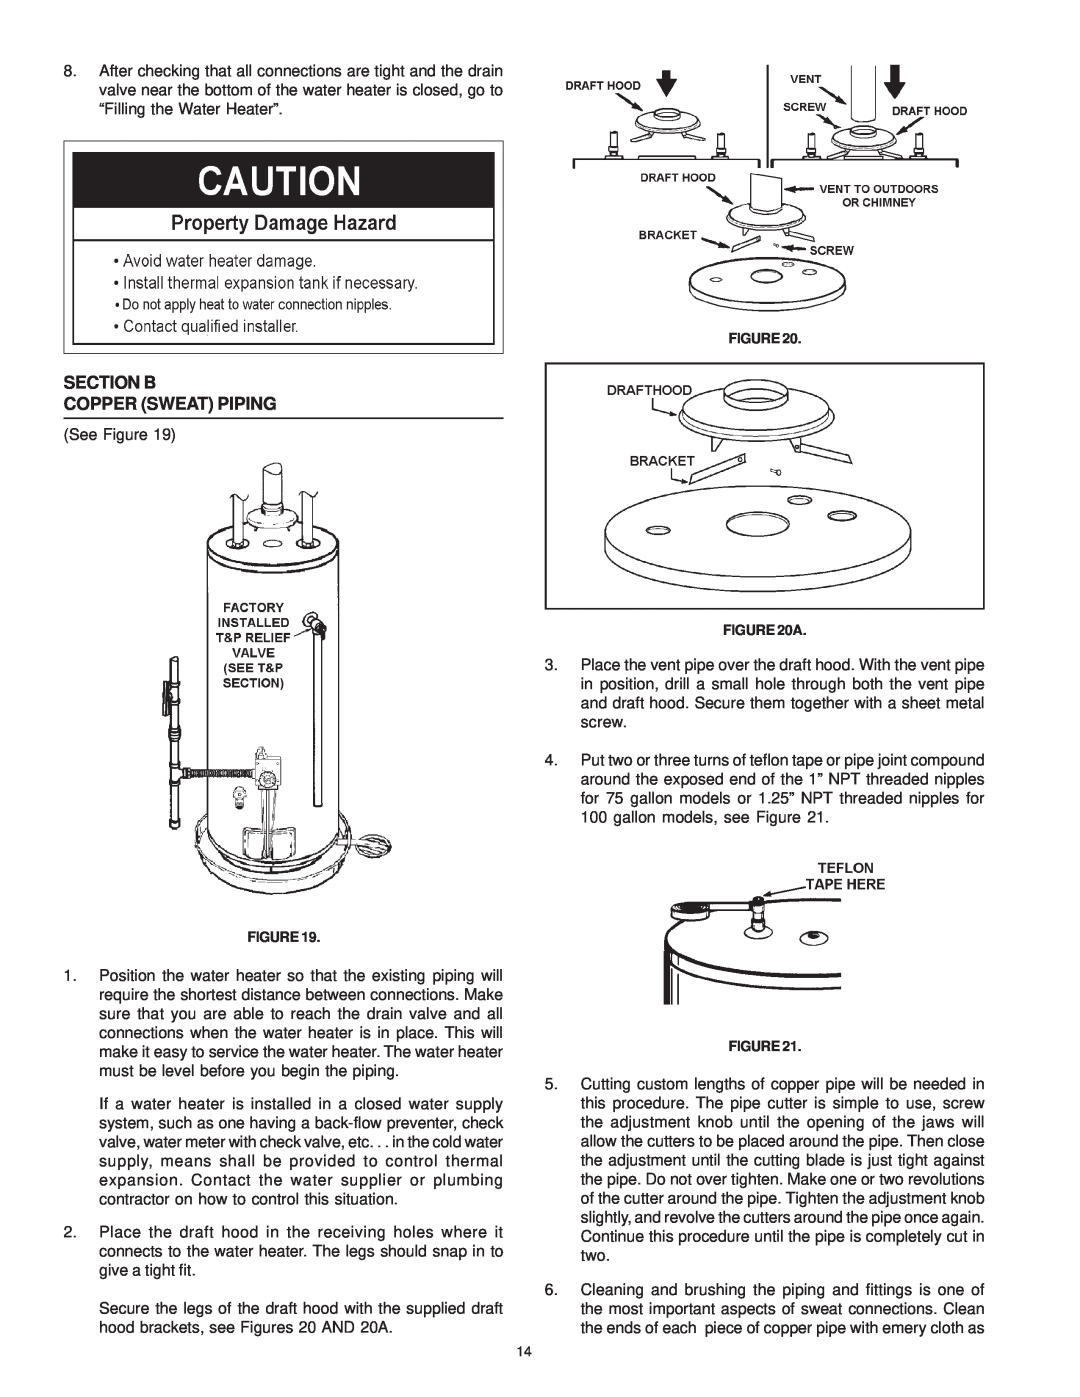 Reliance Water Heaters 196296-001, 606 Series instruction manual Section B Copper Sweat Piping 